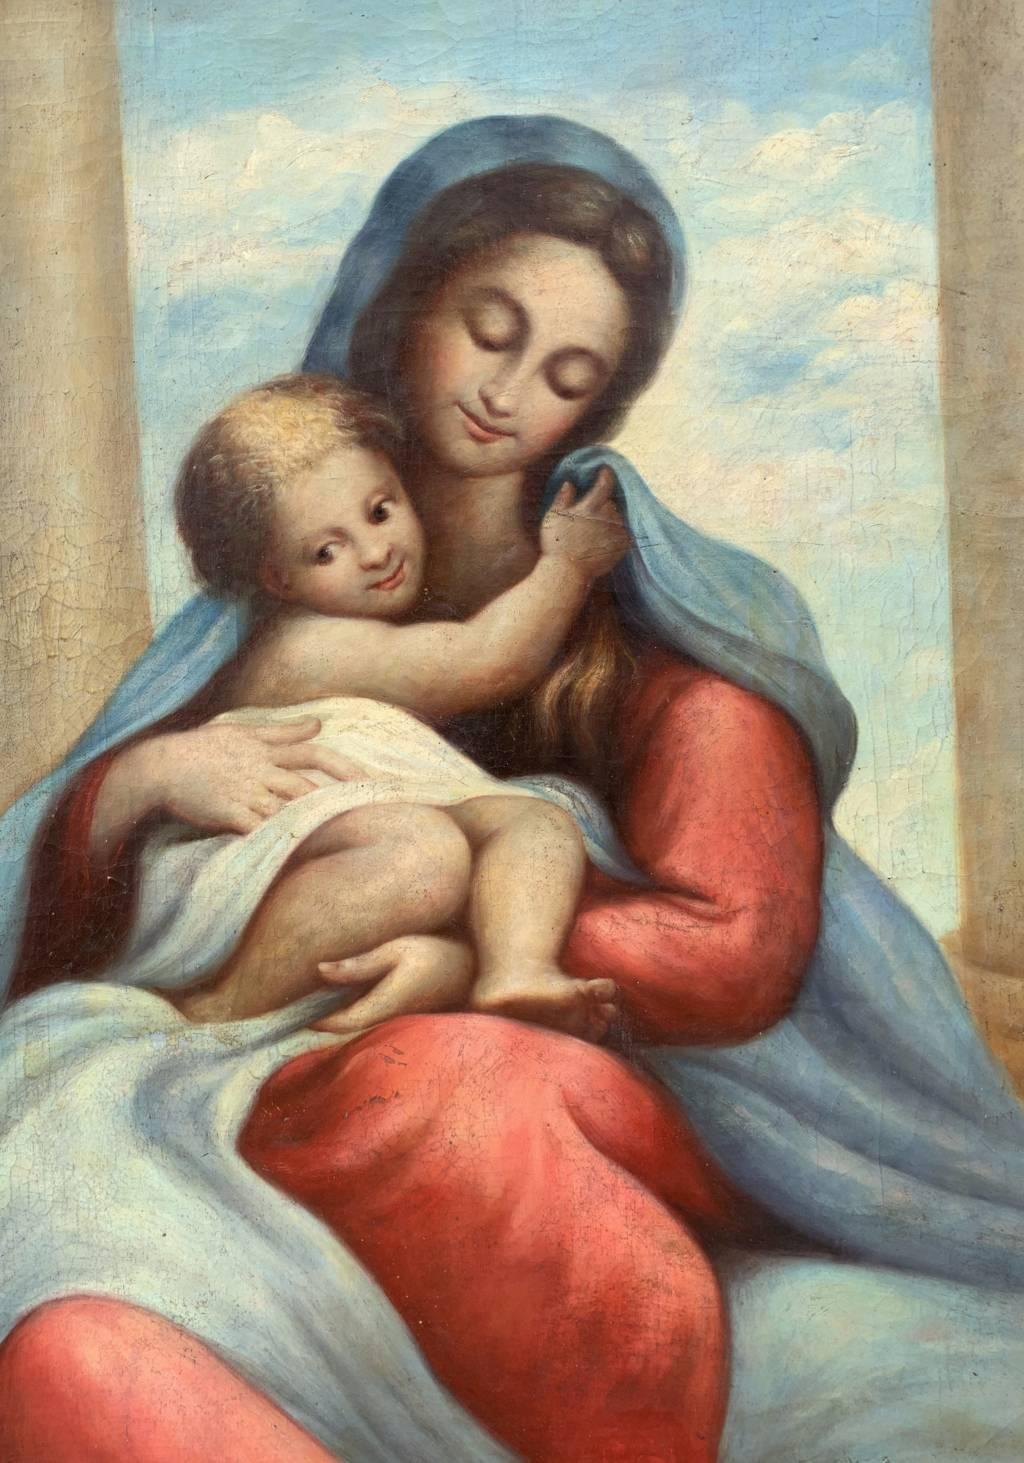 Antique Italian painter - 19th century large figure painting - Virgin child  - Old Masters Painting by Unknown